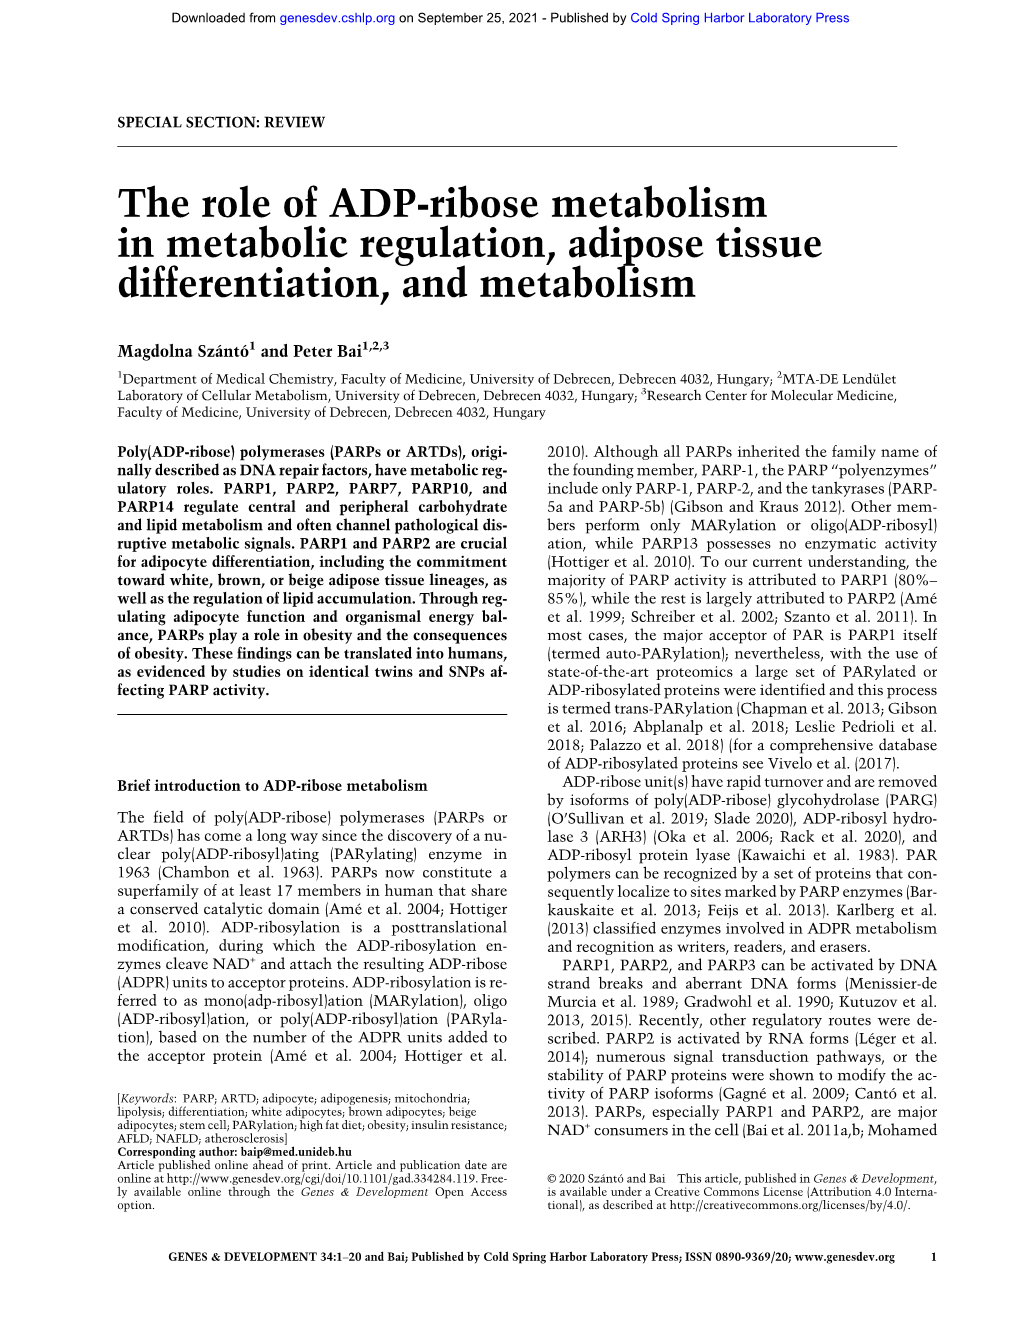 The Role of ADP-Ribose Metabolism in Metabolic Regulation, Adipose Tissue Differentiation, and Metabolism